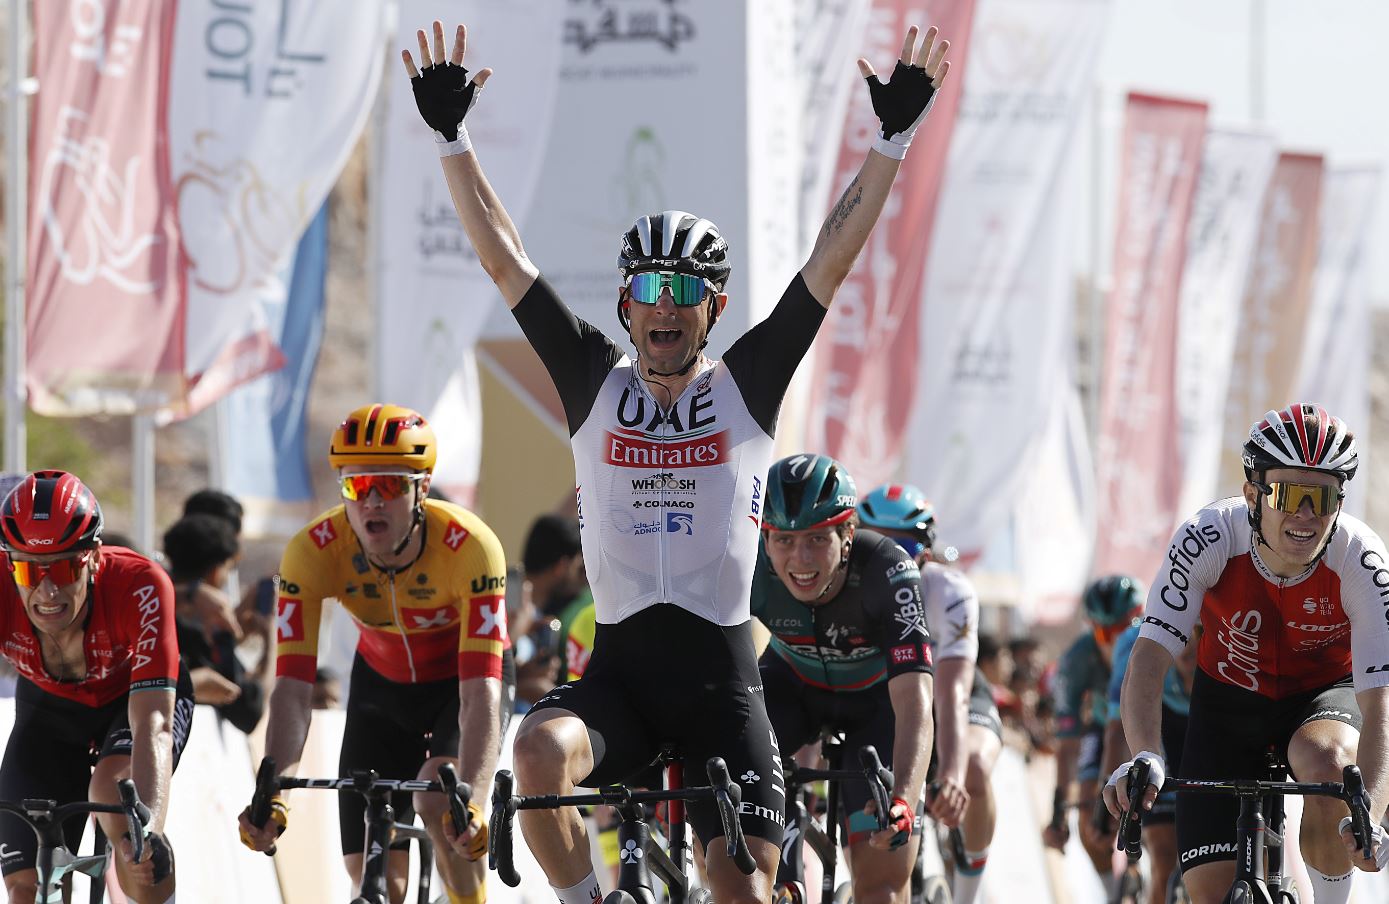 The UAE team is the champion of the fourth stage in the “Tour of Oman”